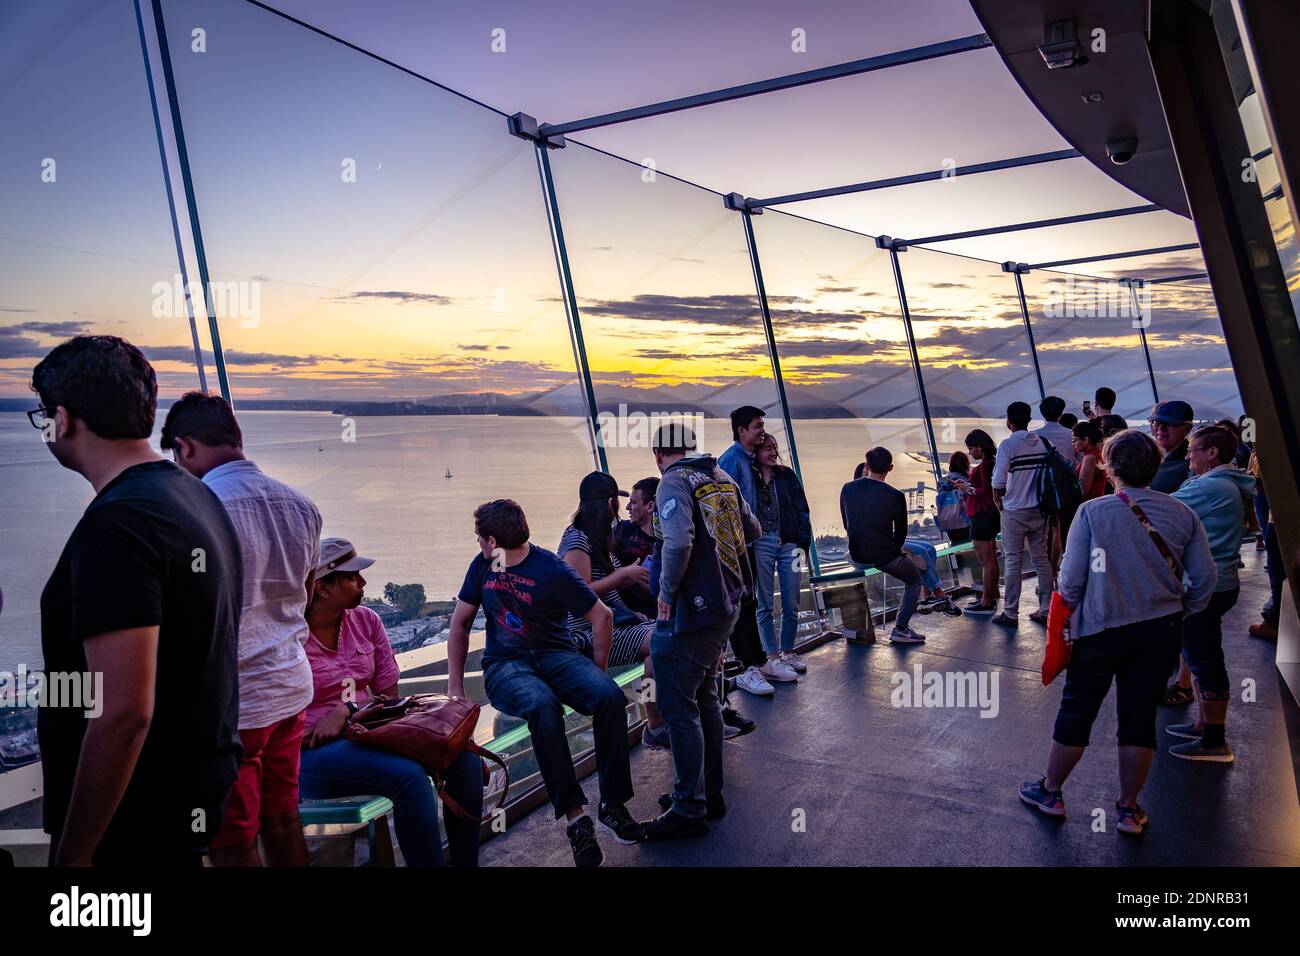 Seattle, Washington, USA - Outdoors observation deck at the Space Needle tower Stock Photo